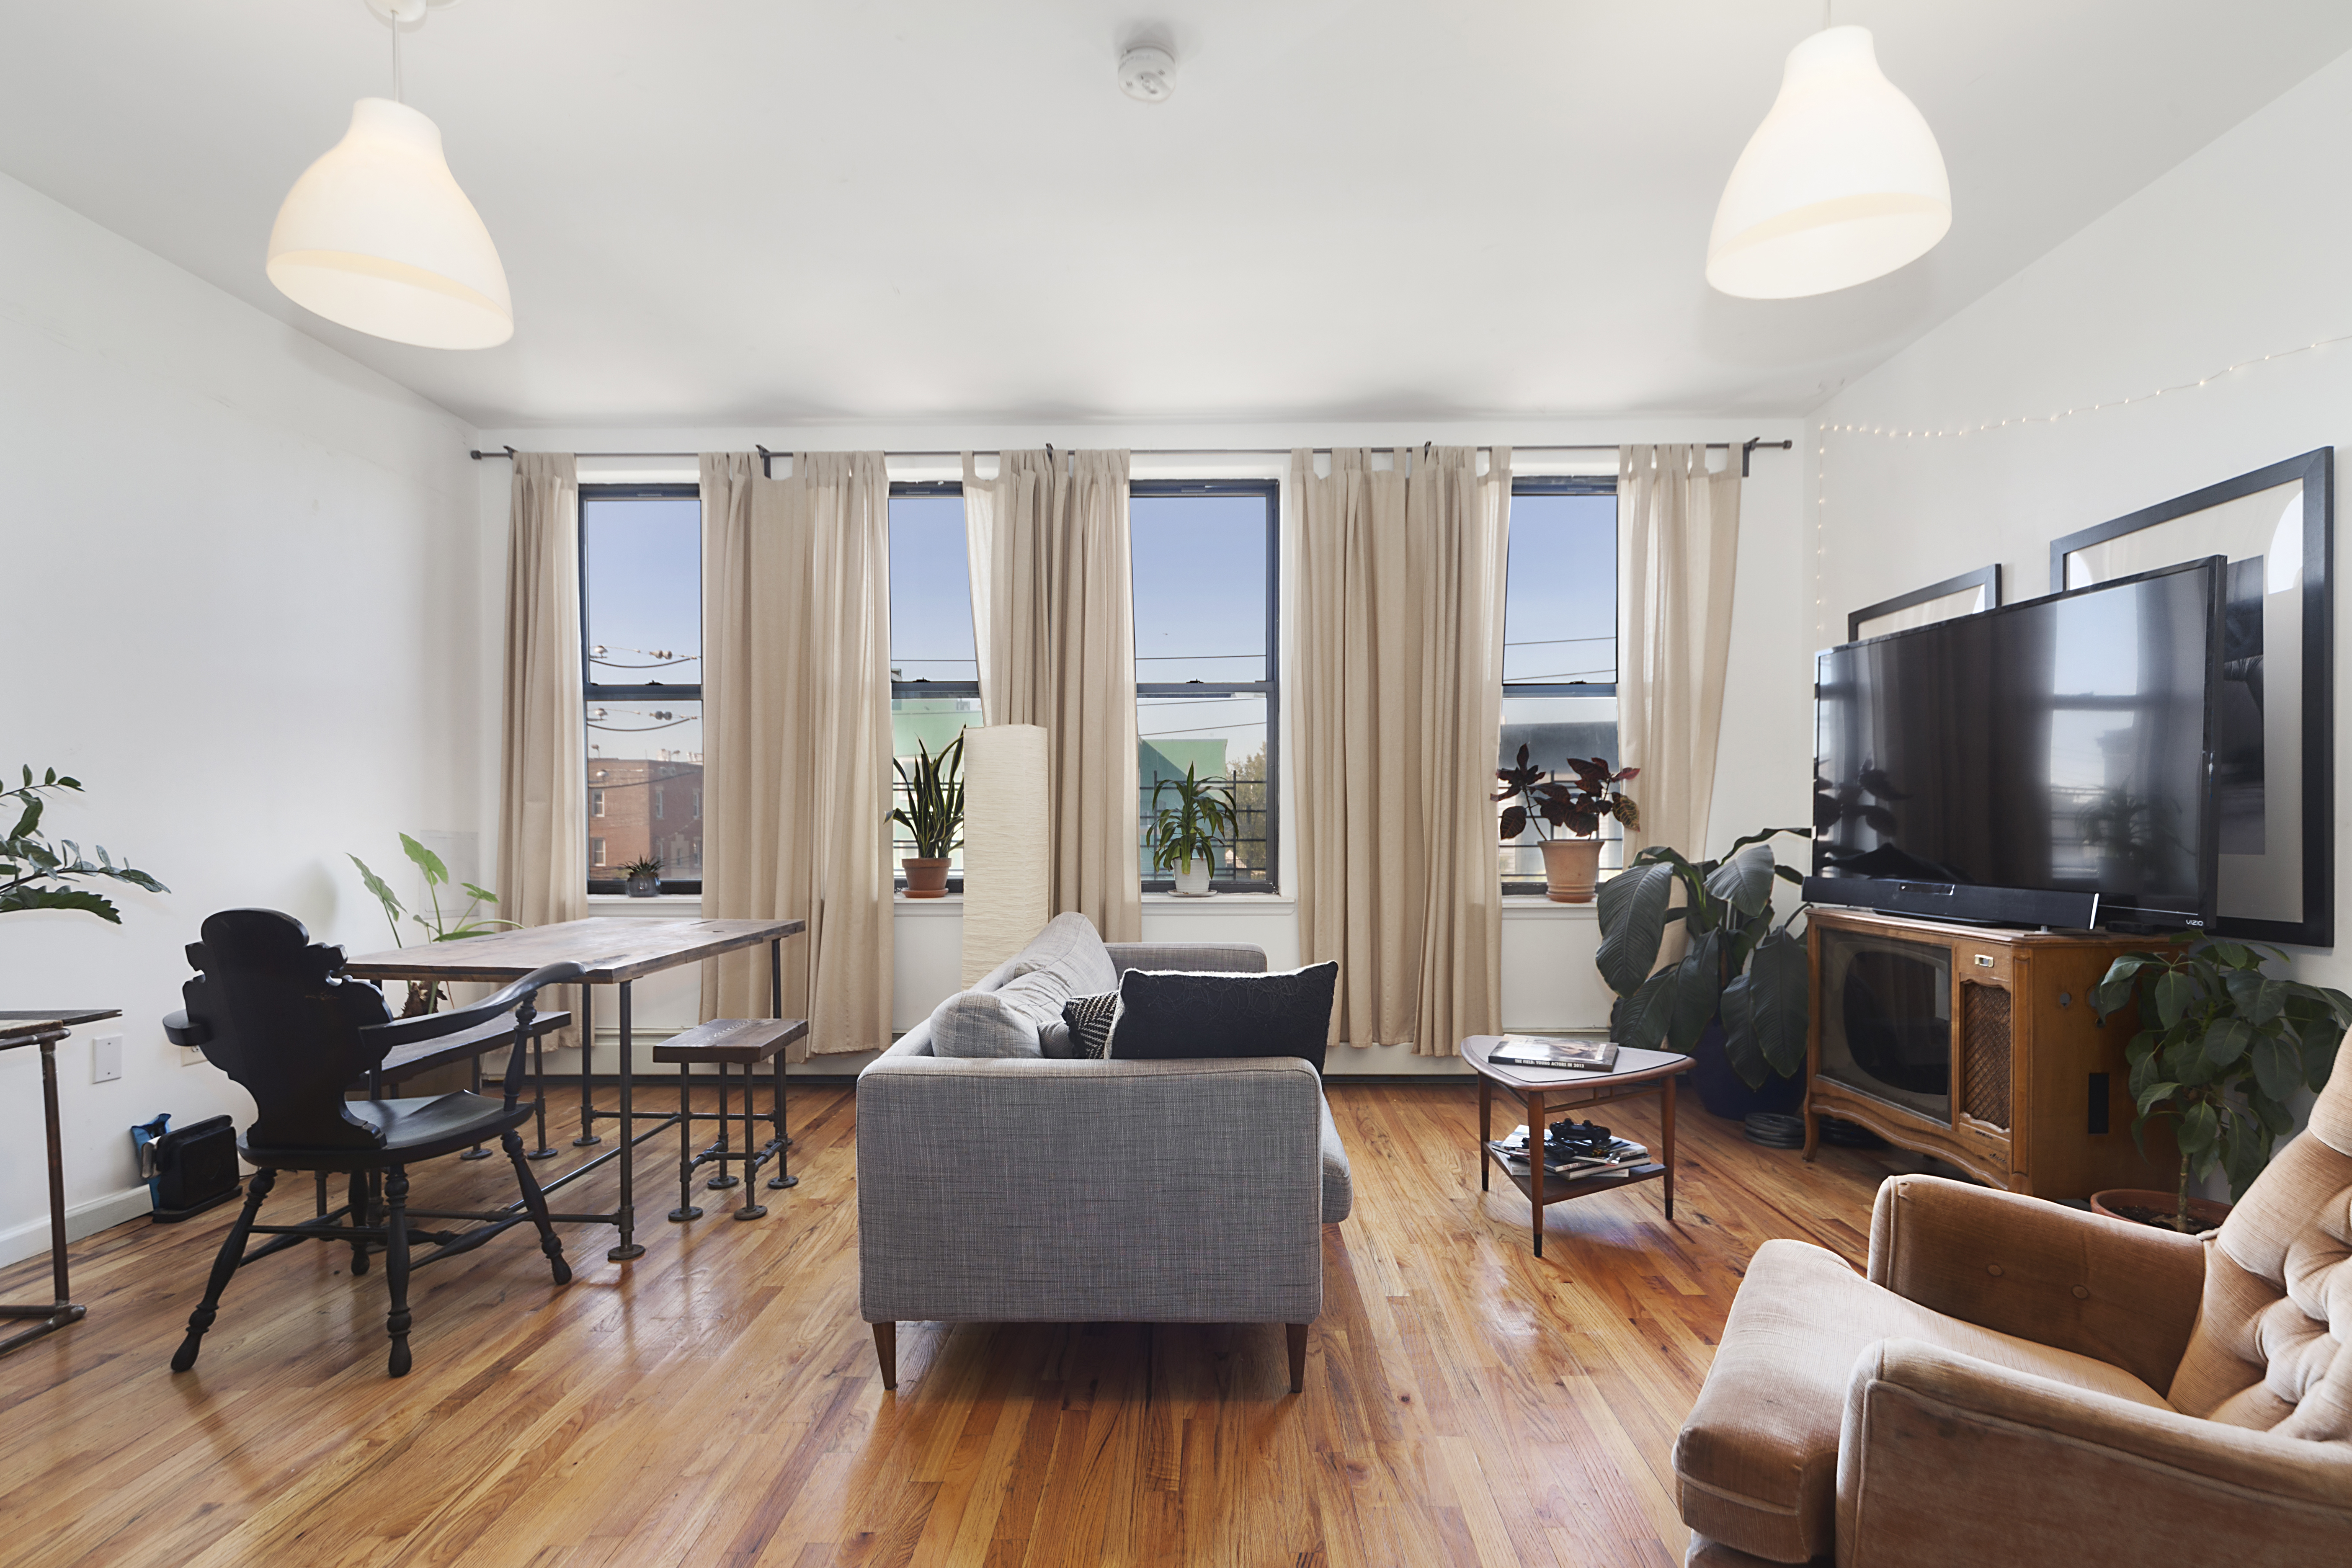 Notorious B.I.G.'s famed NYC apartment hits market for $1.7M